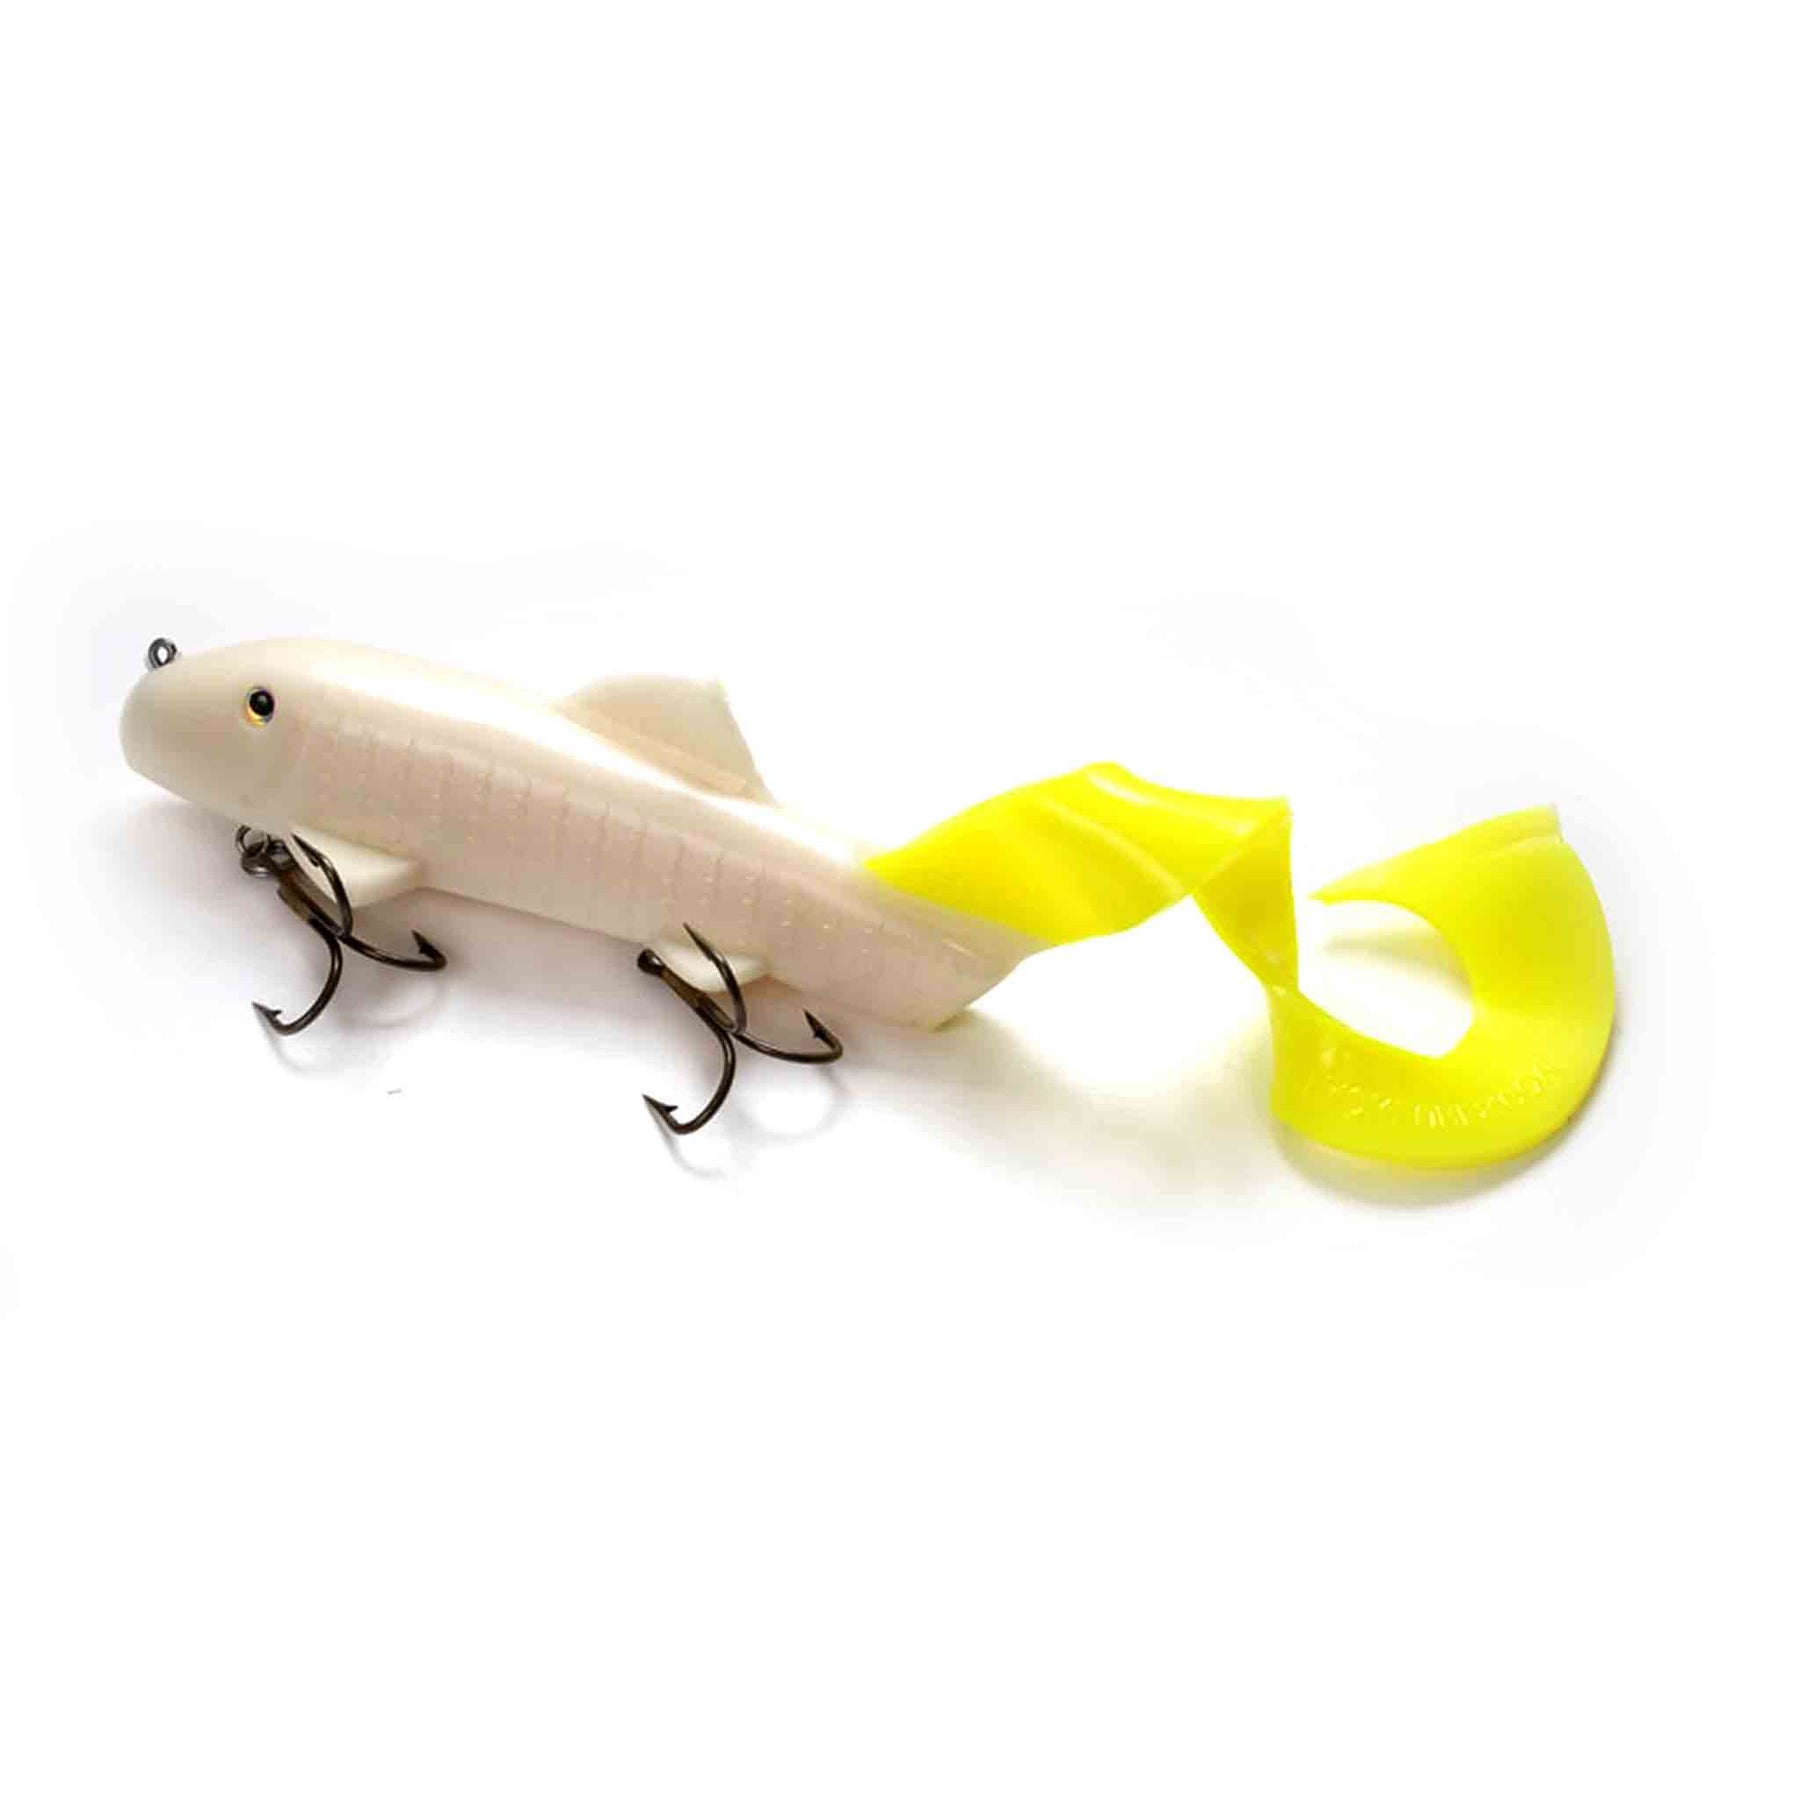 View of Rubber Suick Curly Sue 9" Lemon Tail available at EZOKO Pike and Musky Shop